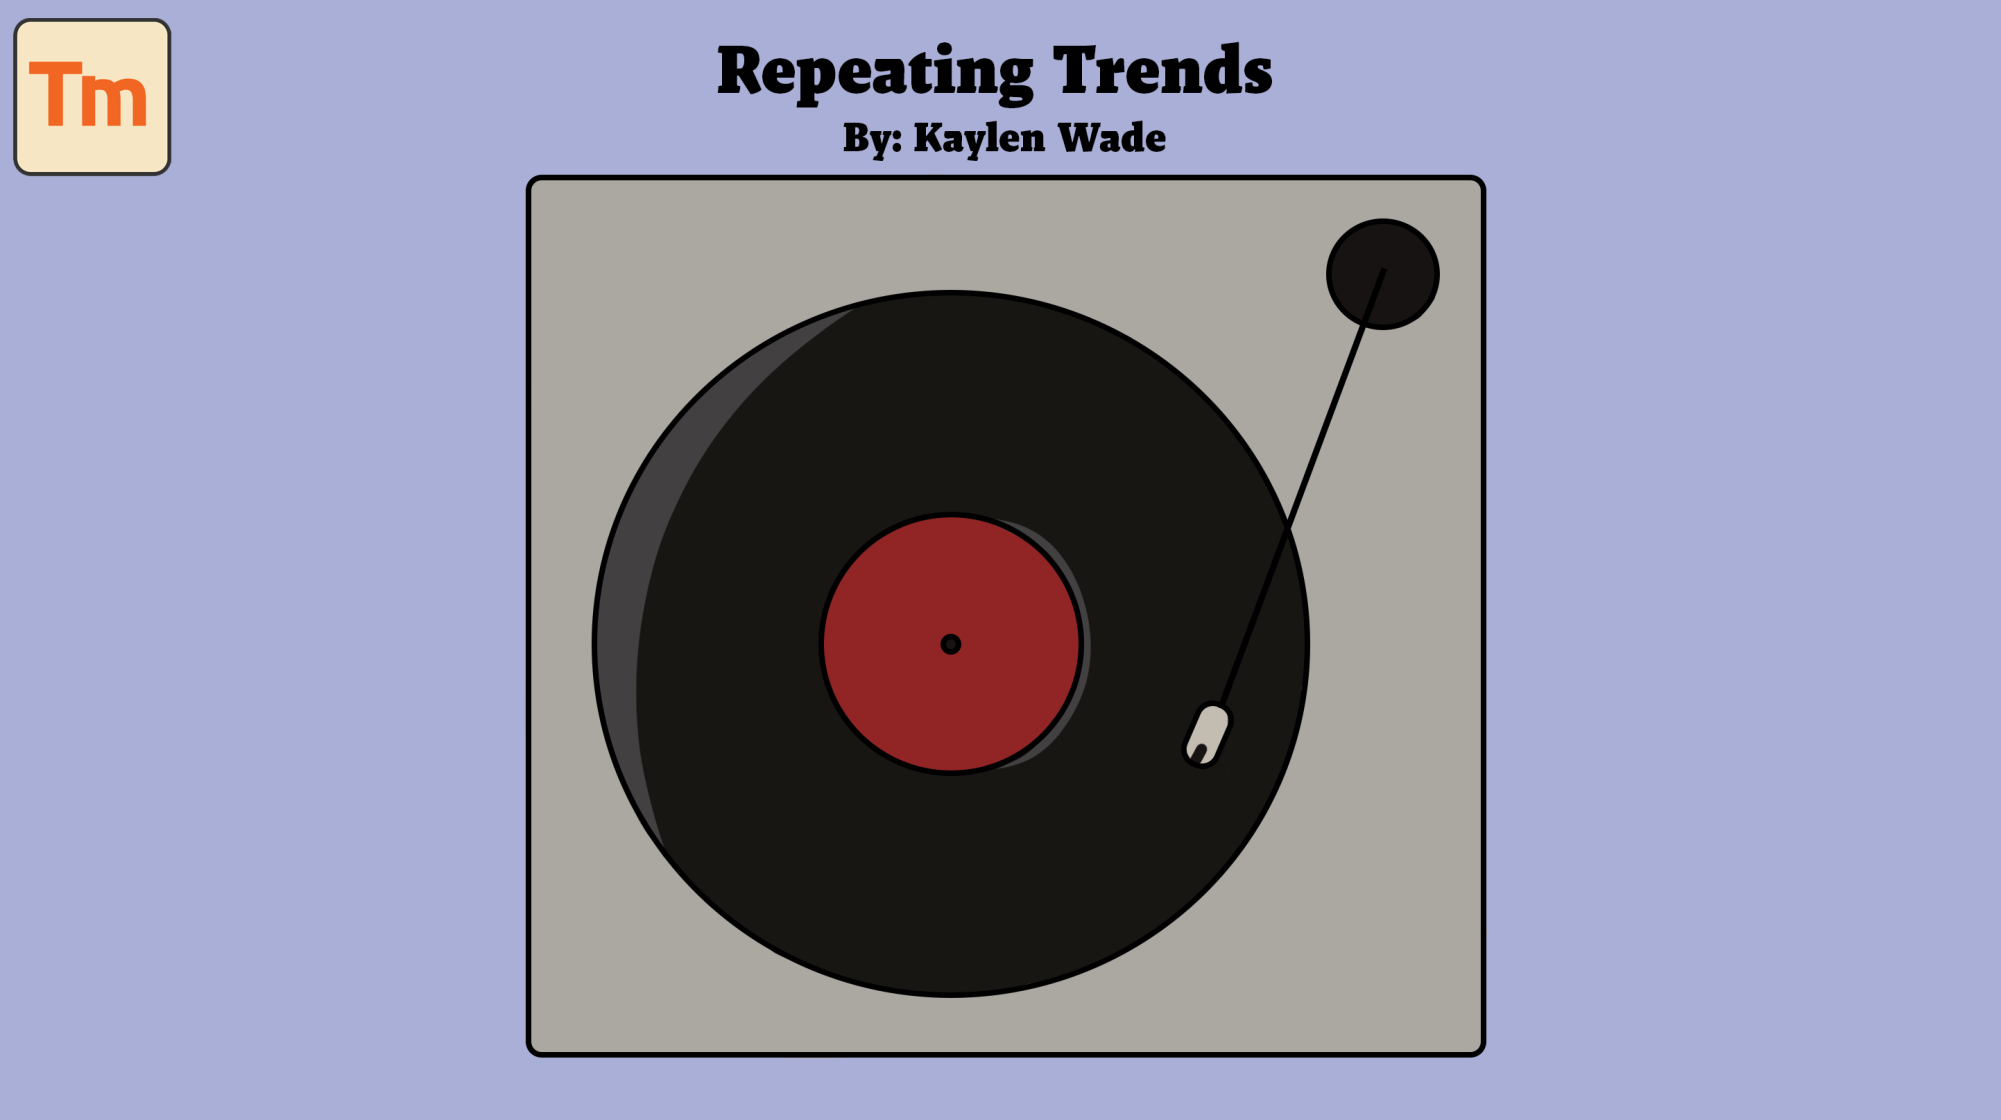 Repeating Trends